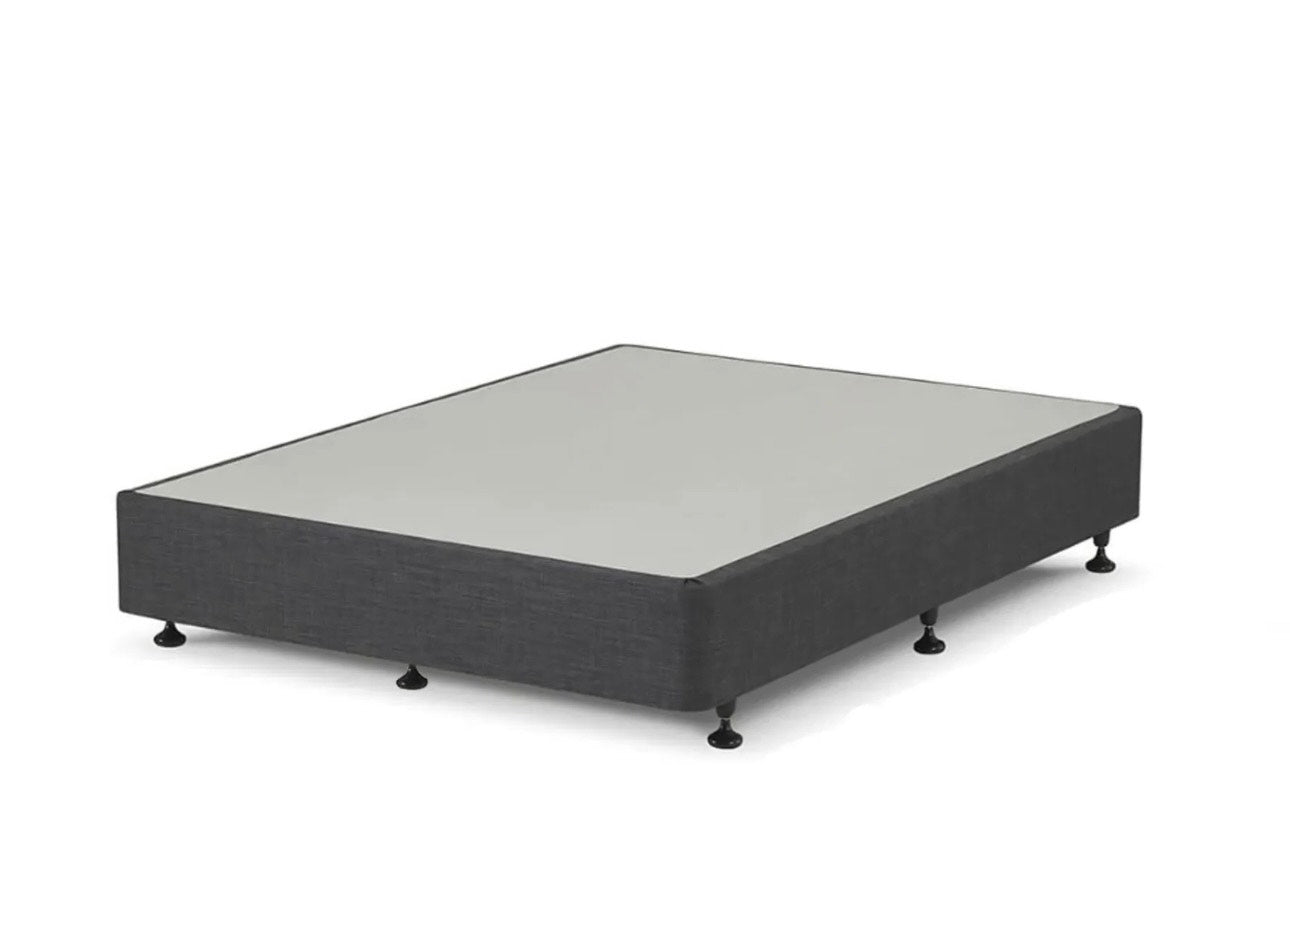 King Bed Base- SOLD OUT